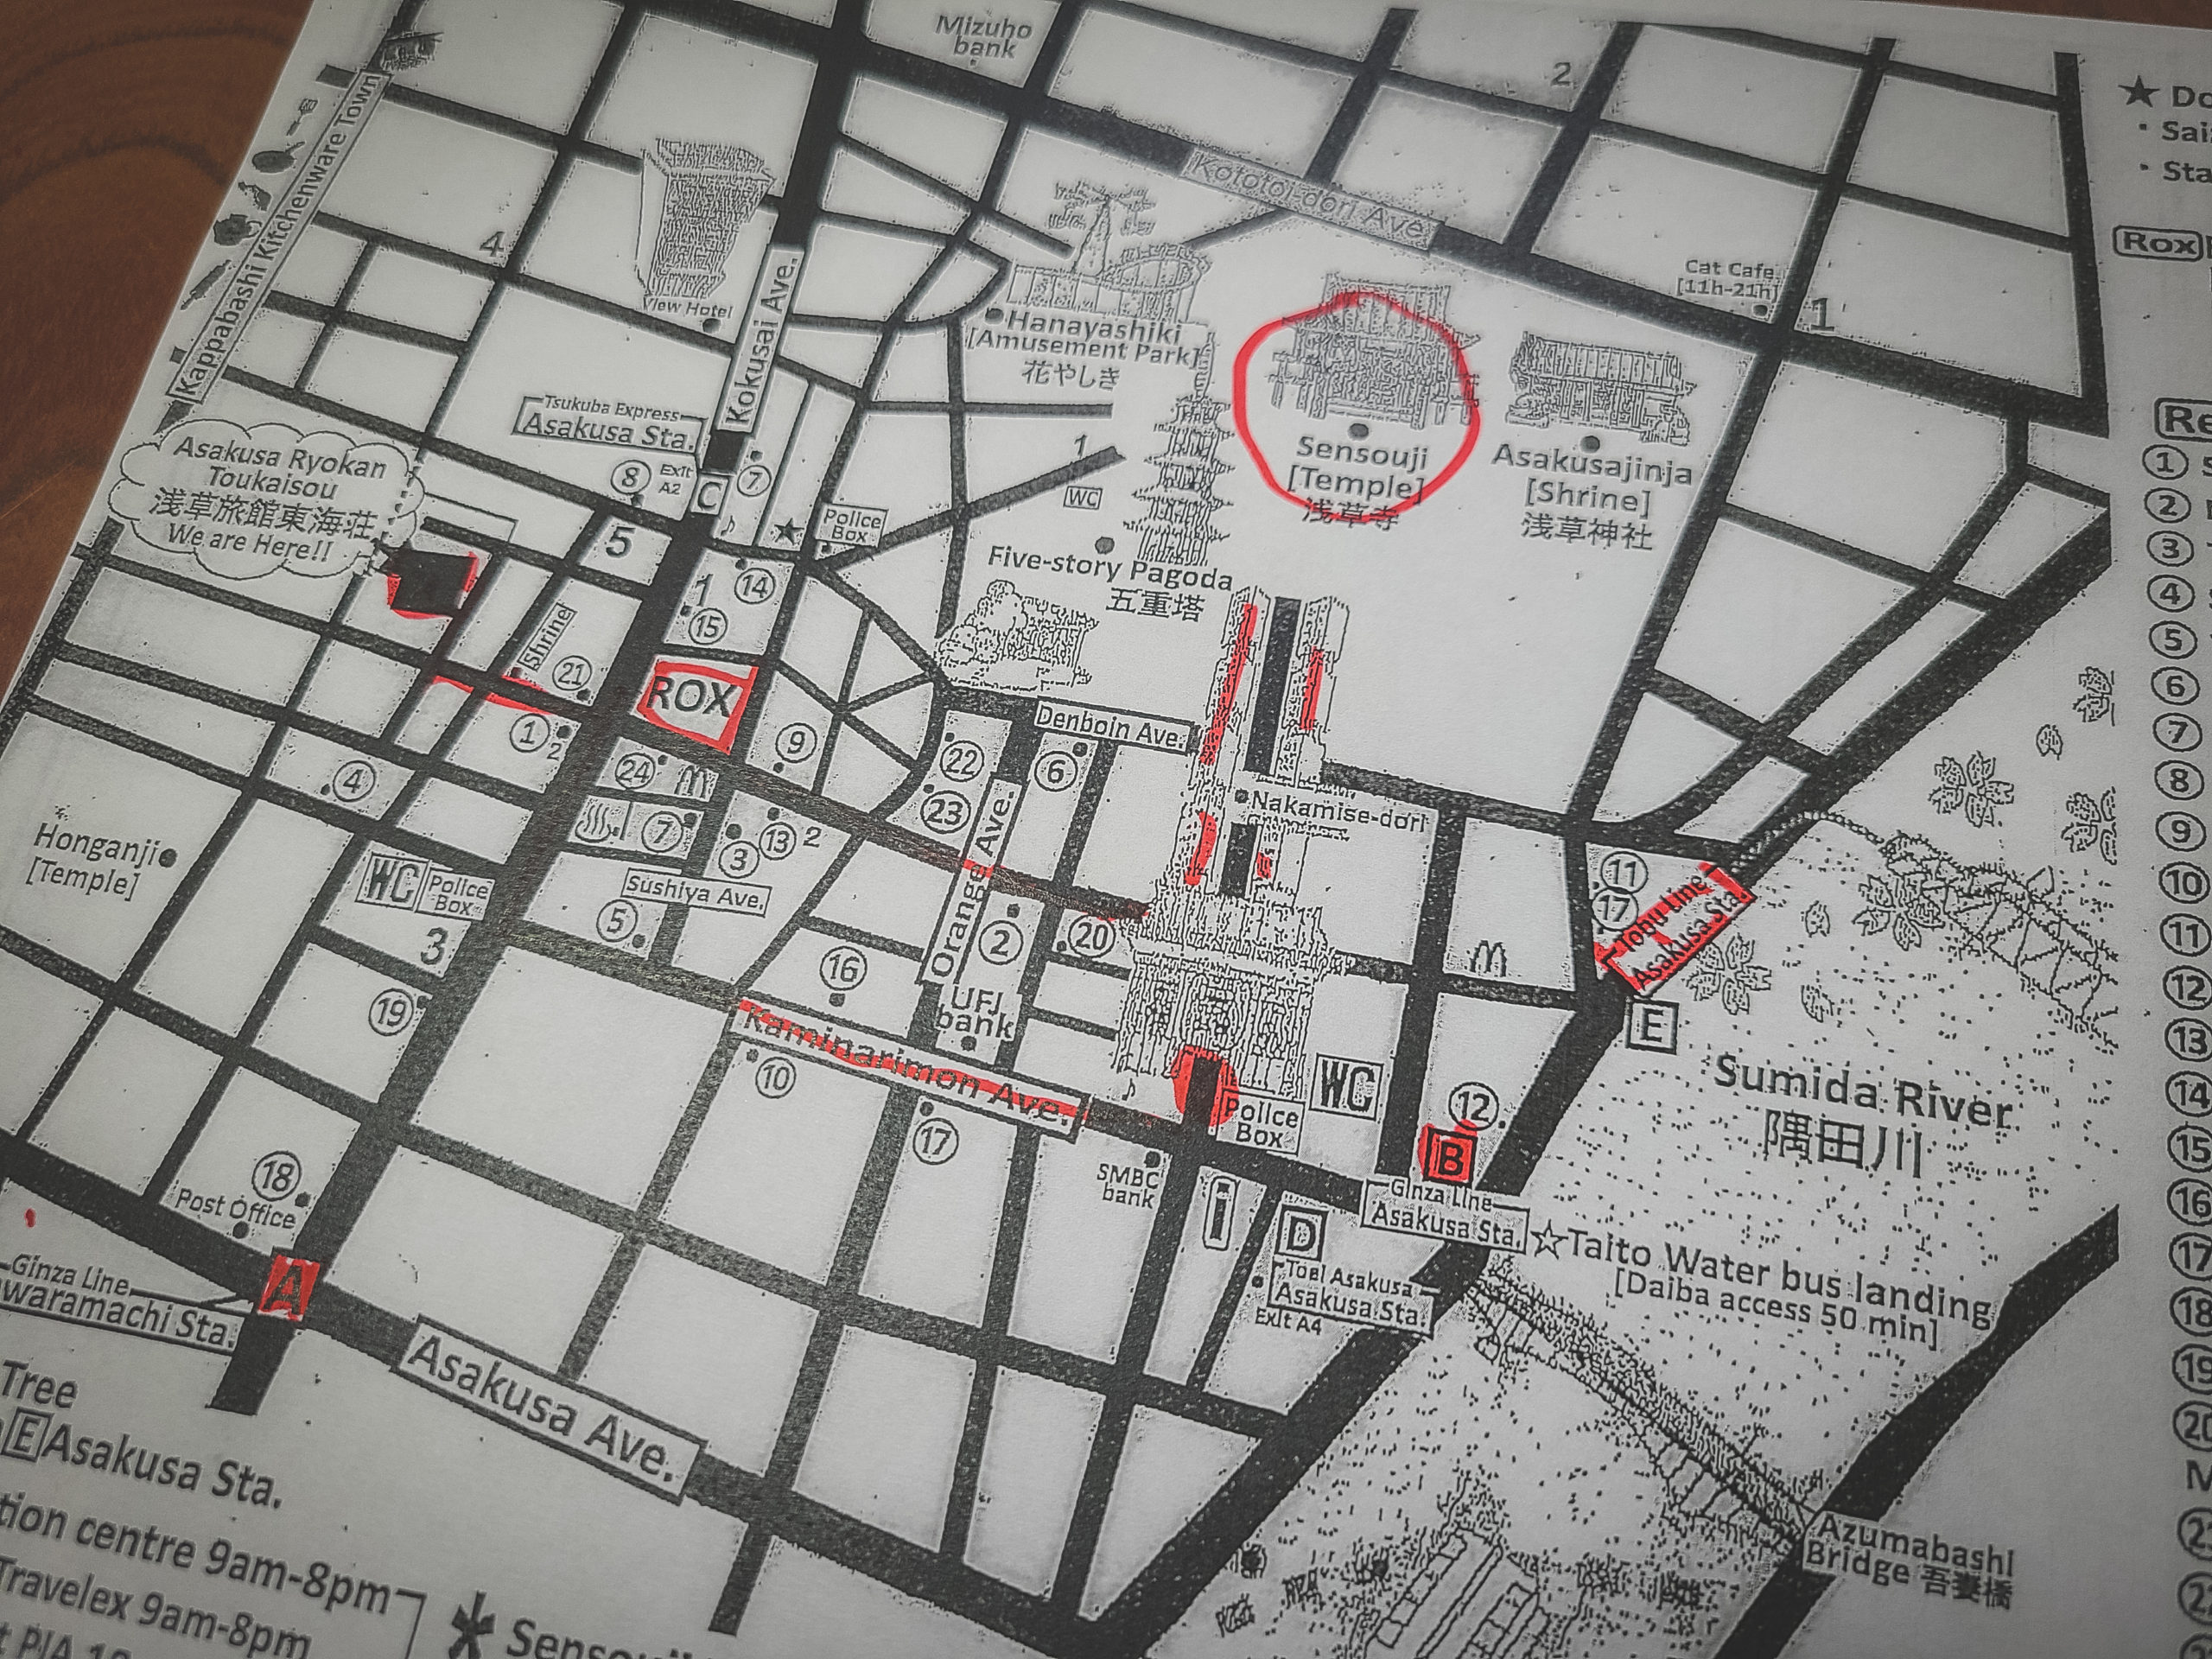 Hattori-san’s map—but for details, you’ll have to talk to the man himself